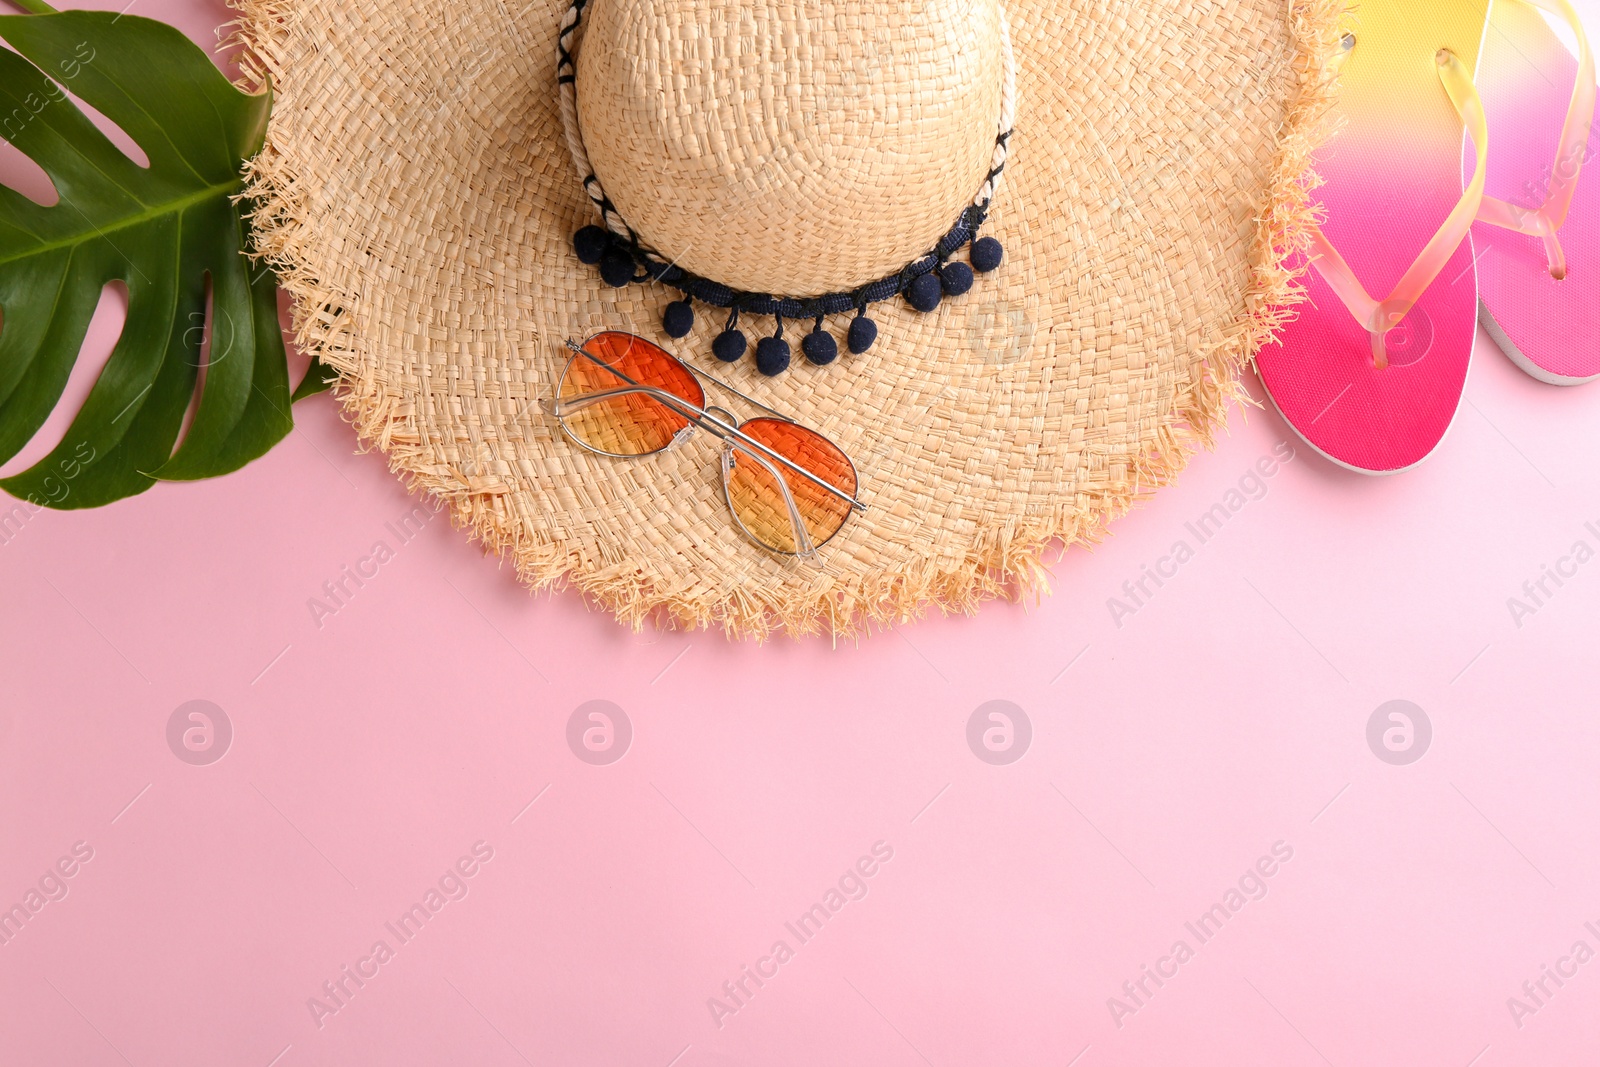 Photo of Flat lay composition with stylish hat and beach objects on color background